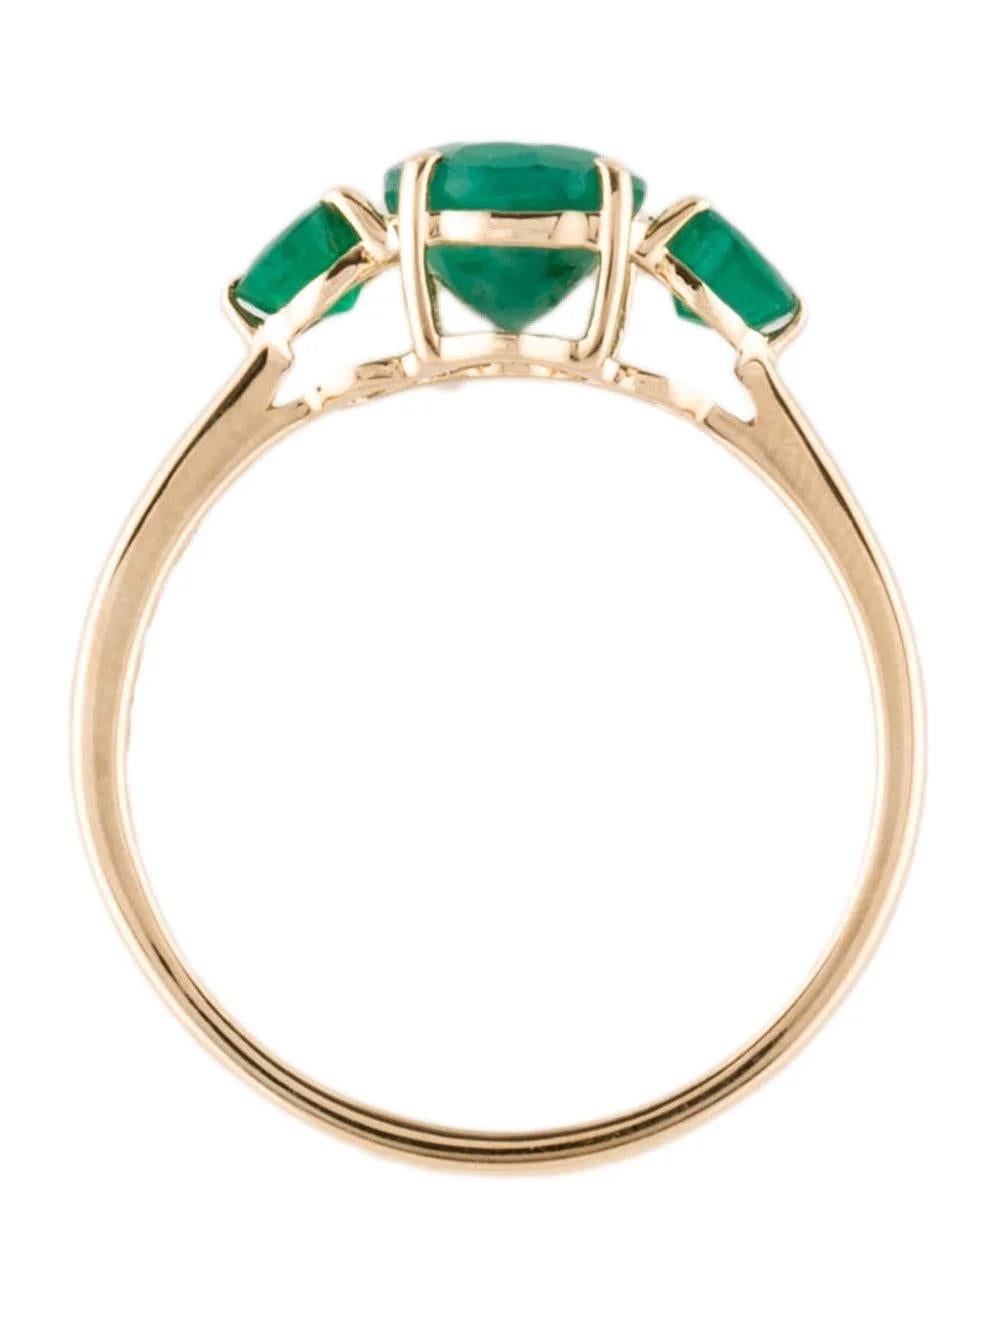 Women's 14K Emerald Cocktail Ring, Size 6.75, Stunning Yellow Gold, Genuine Gemstone For Sale